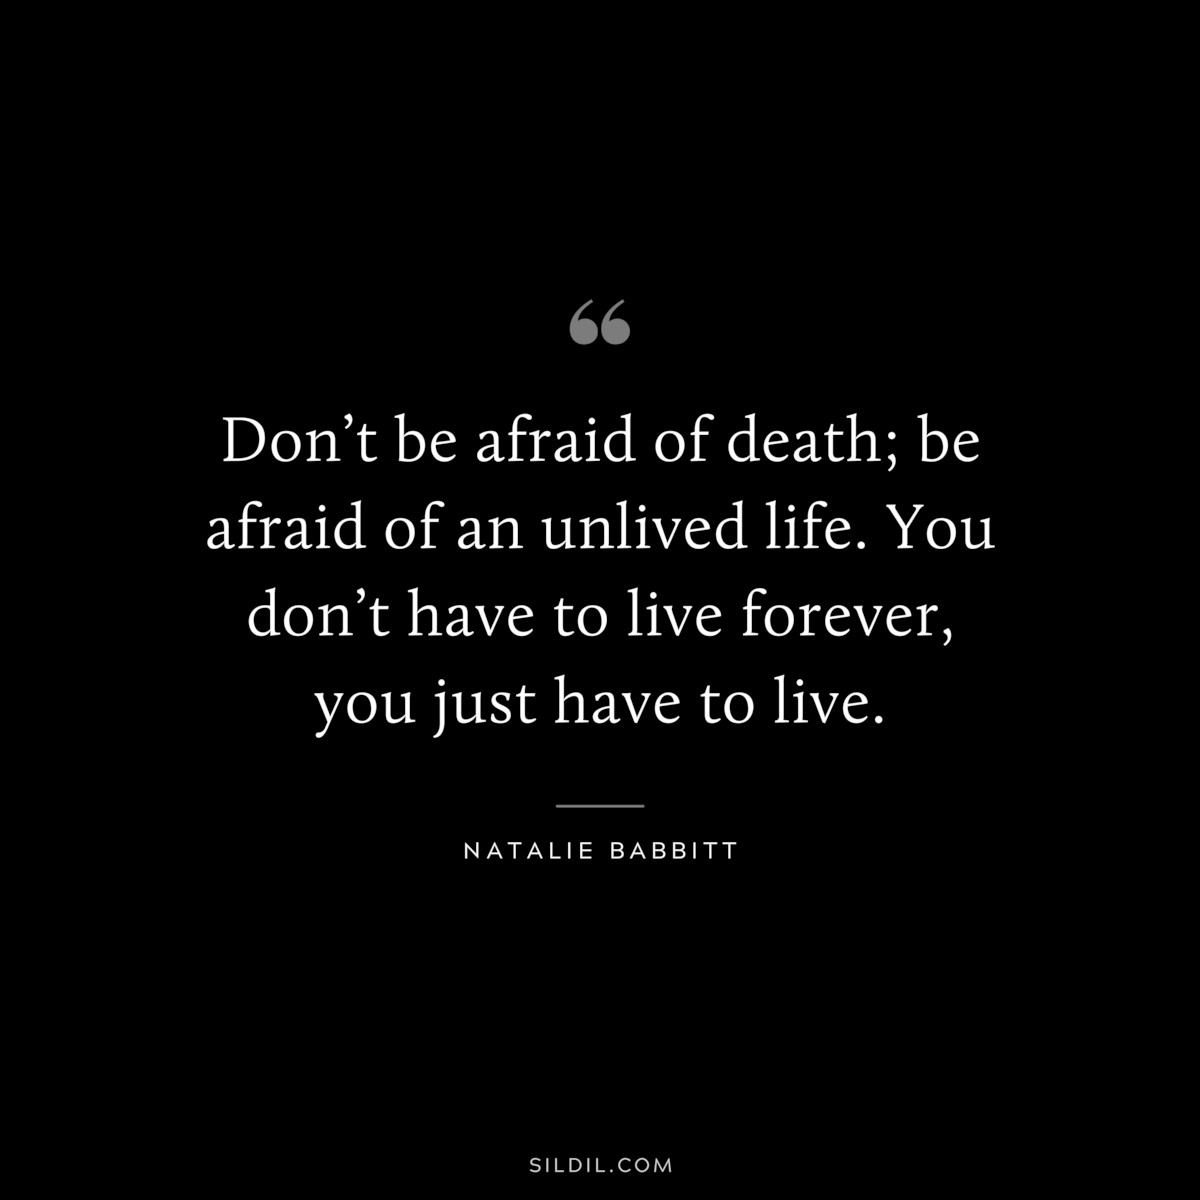 Don’t be afraid of death; be afraid of an unlived life. You don’t have to live forever, you just have to live. ― Natalie Babbitt